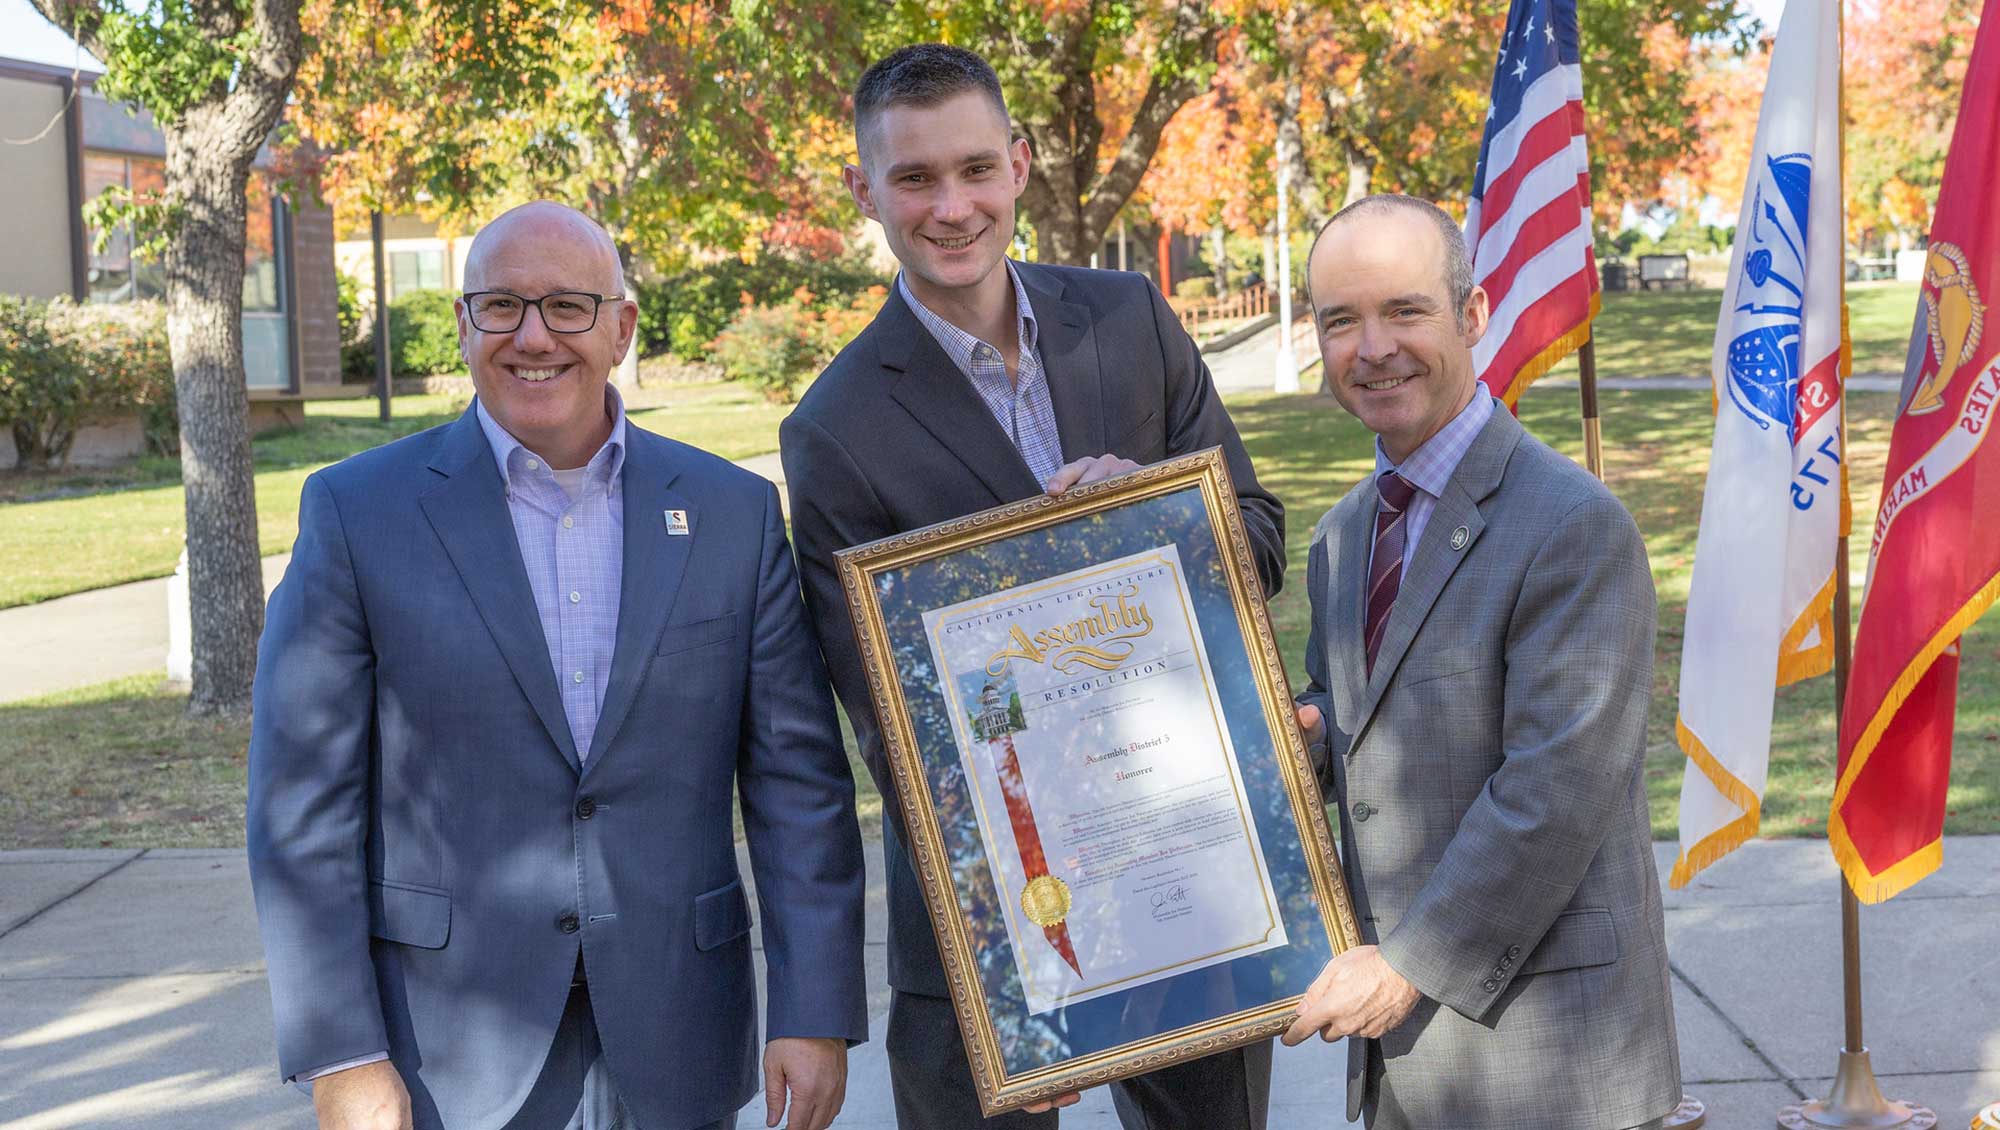 Sierra College Superintendent/President Willy Duncan and Leif Sandness, Veterans Services Specialist accept an Assembly Resolution plaque from California State Assemblyman Joe Patterson